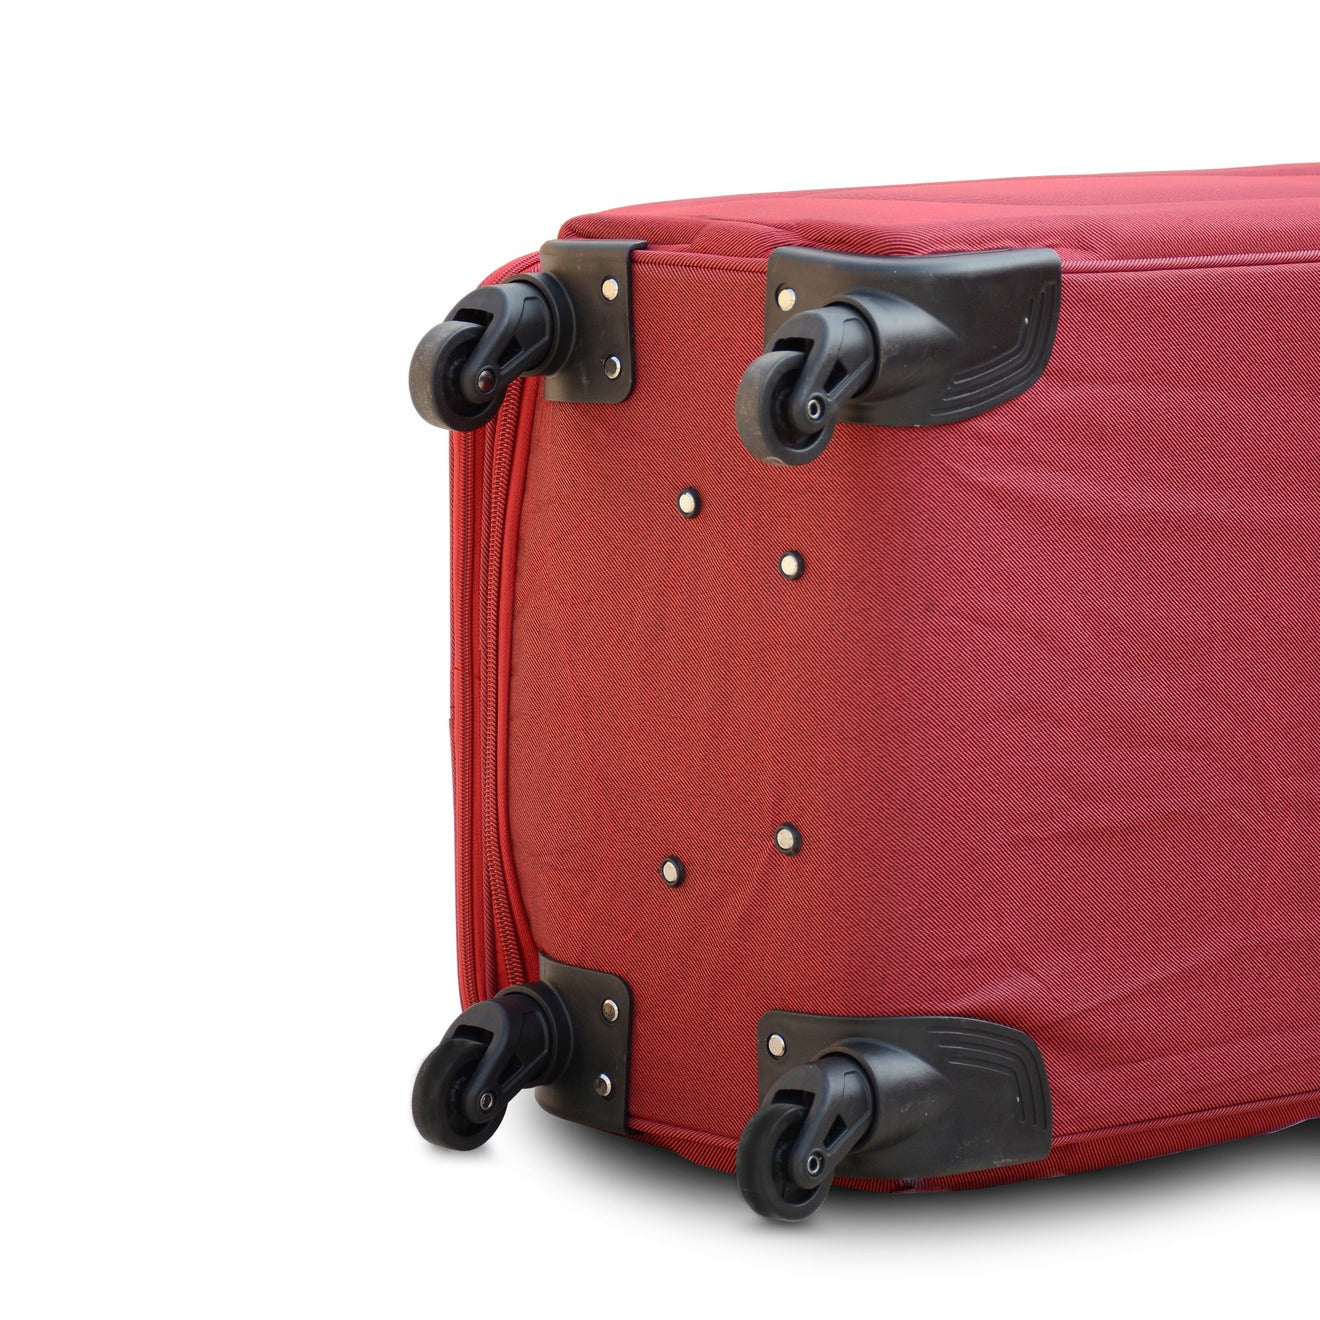 Soft Material Luggage | Soft Shell | Lightweight |  10 Kg - 20 Inches 4 Wheels | 2 Years Warranty | Jian 4 Wheel Red